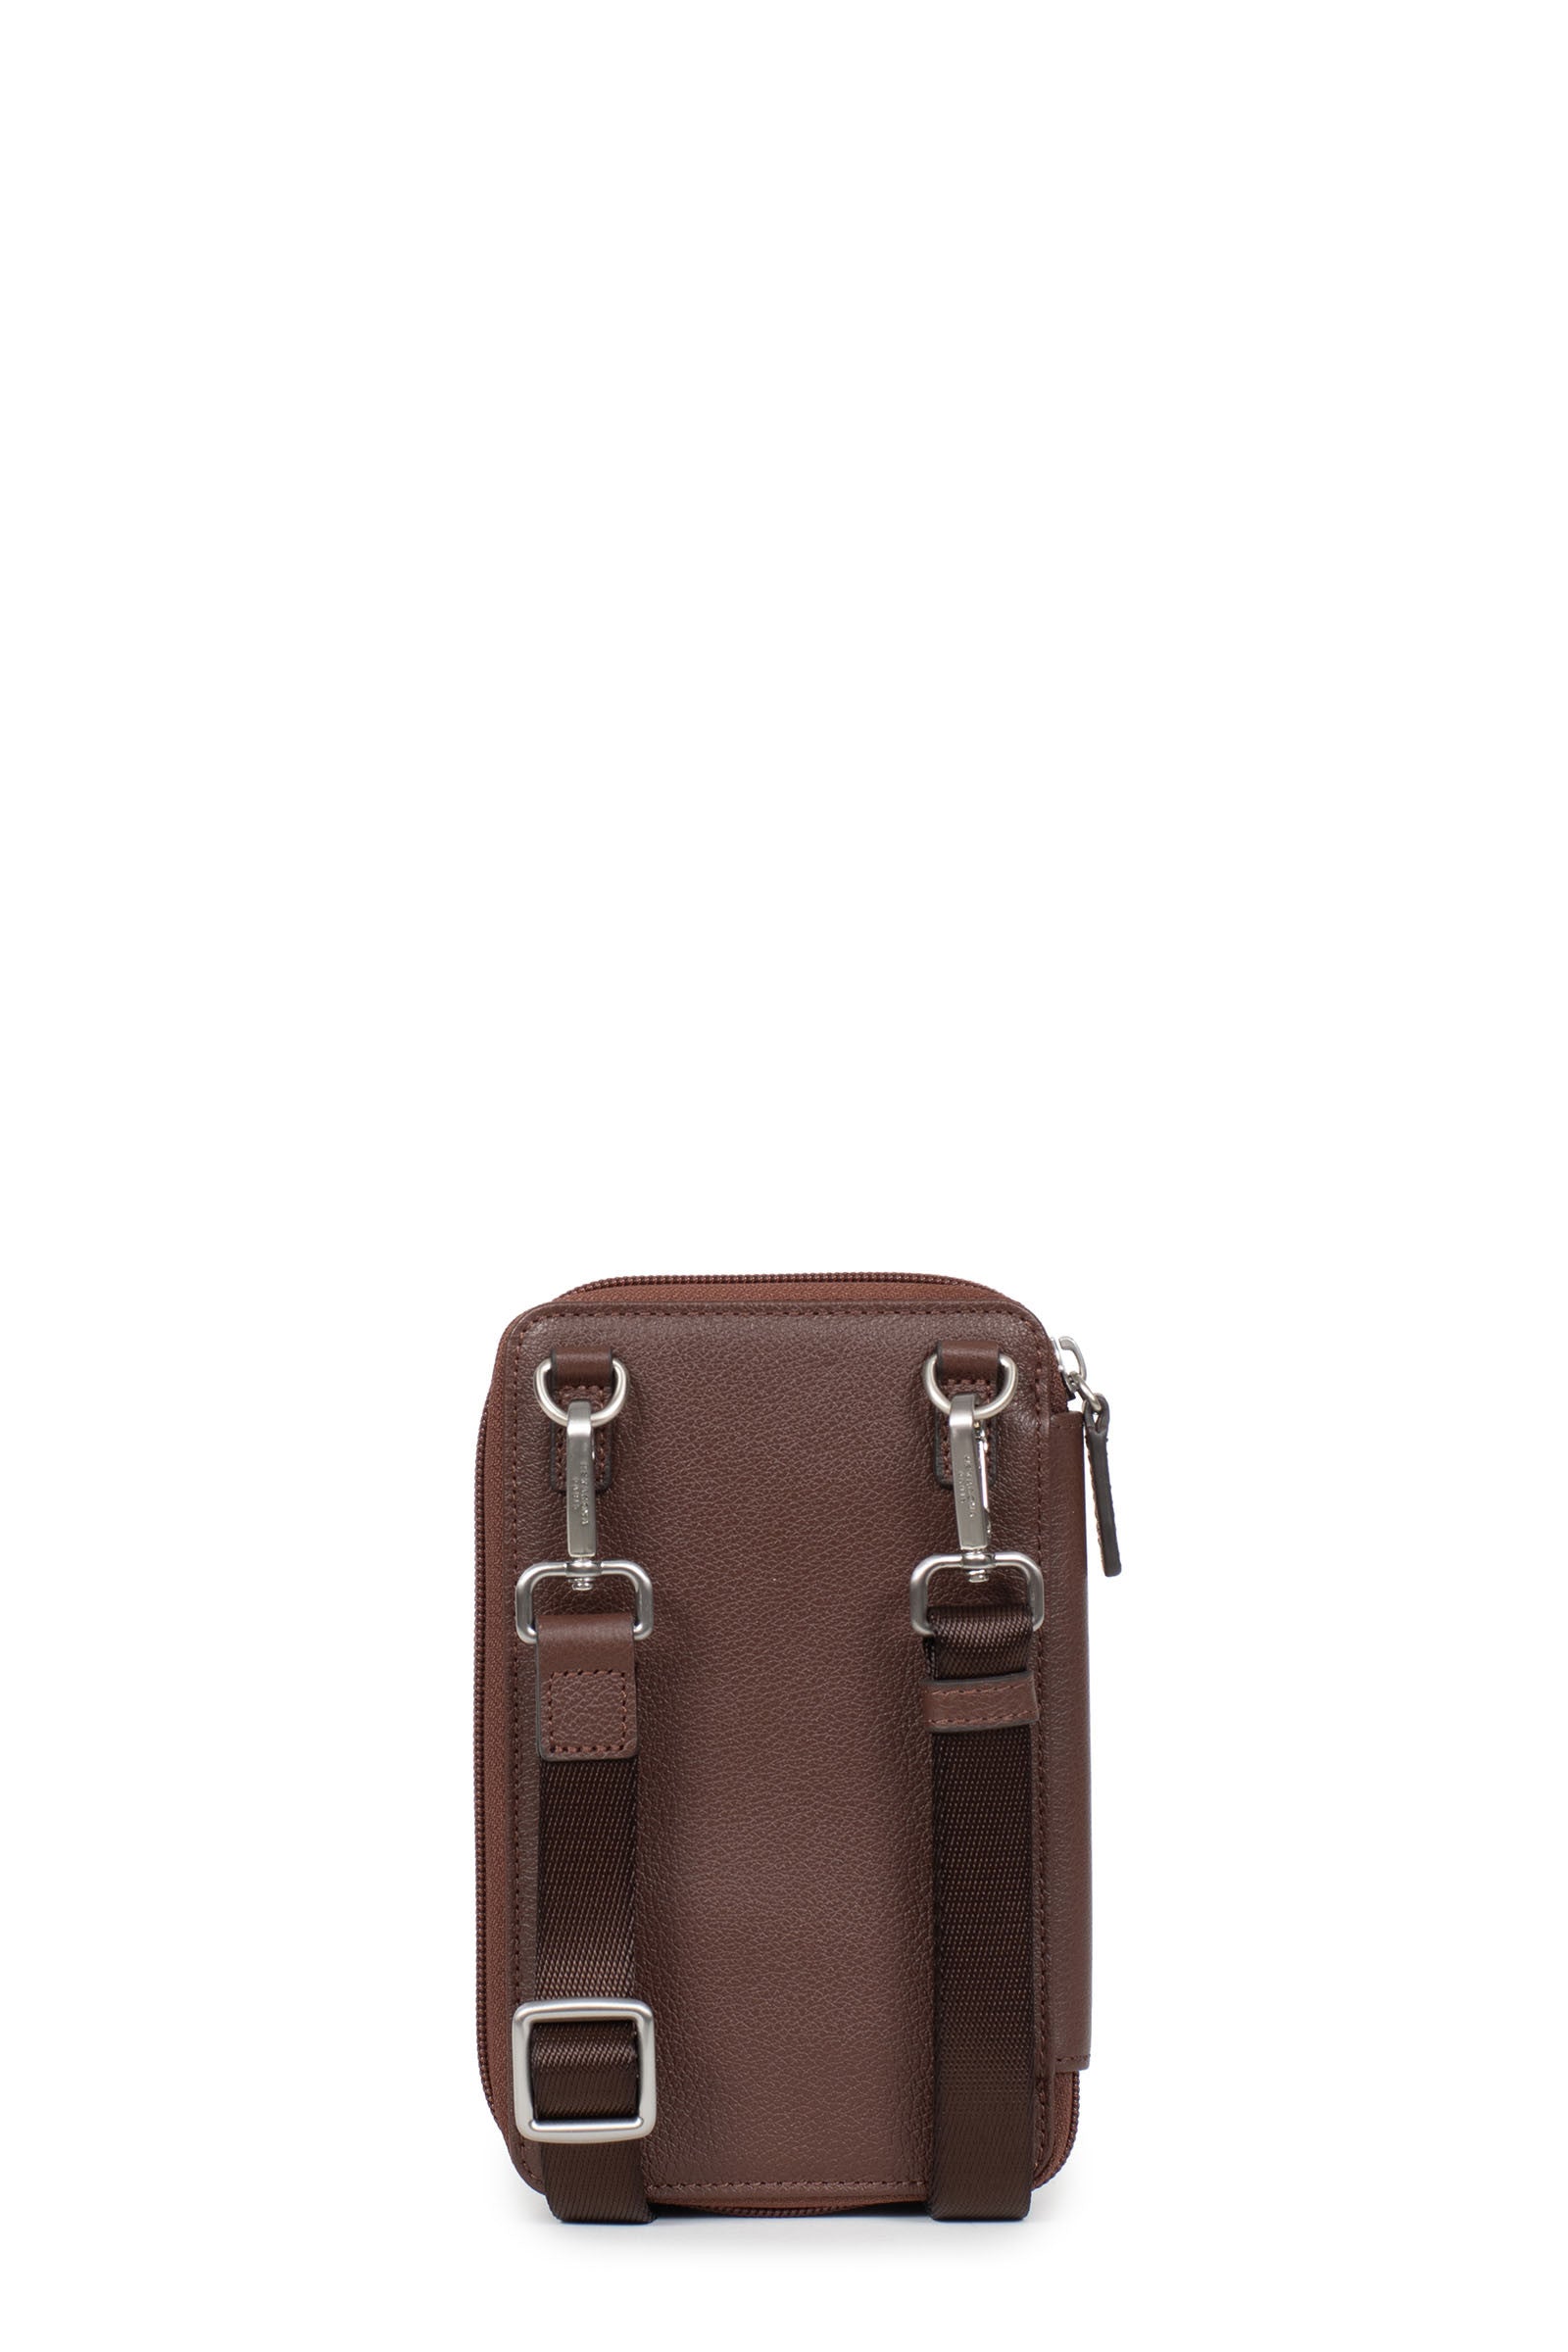 Phone pouch with wallet - Stop RFID - Cowhide leather